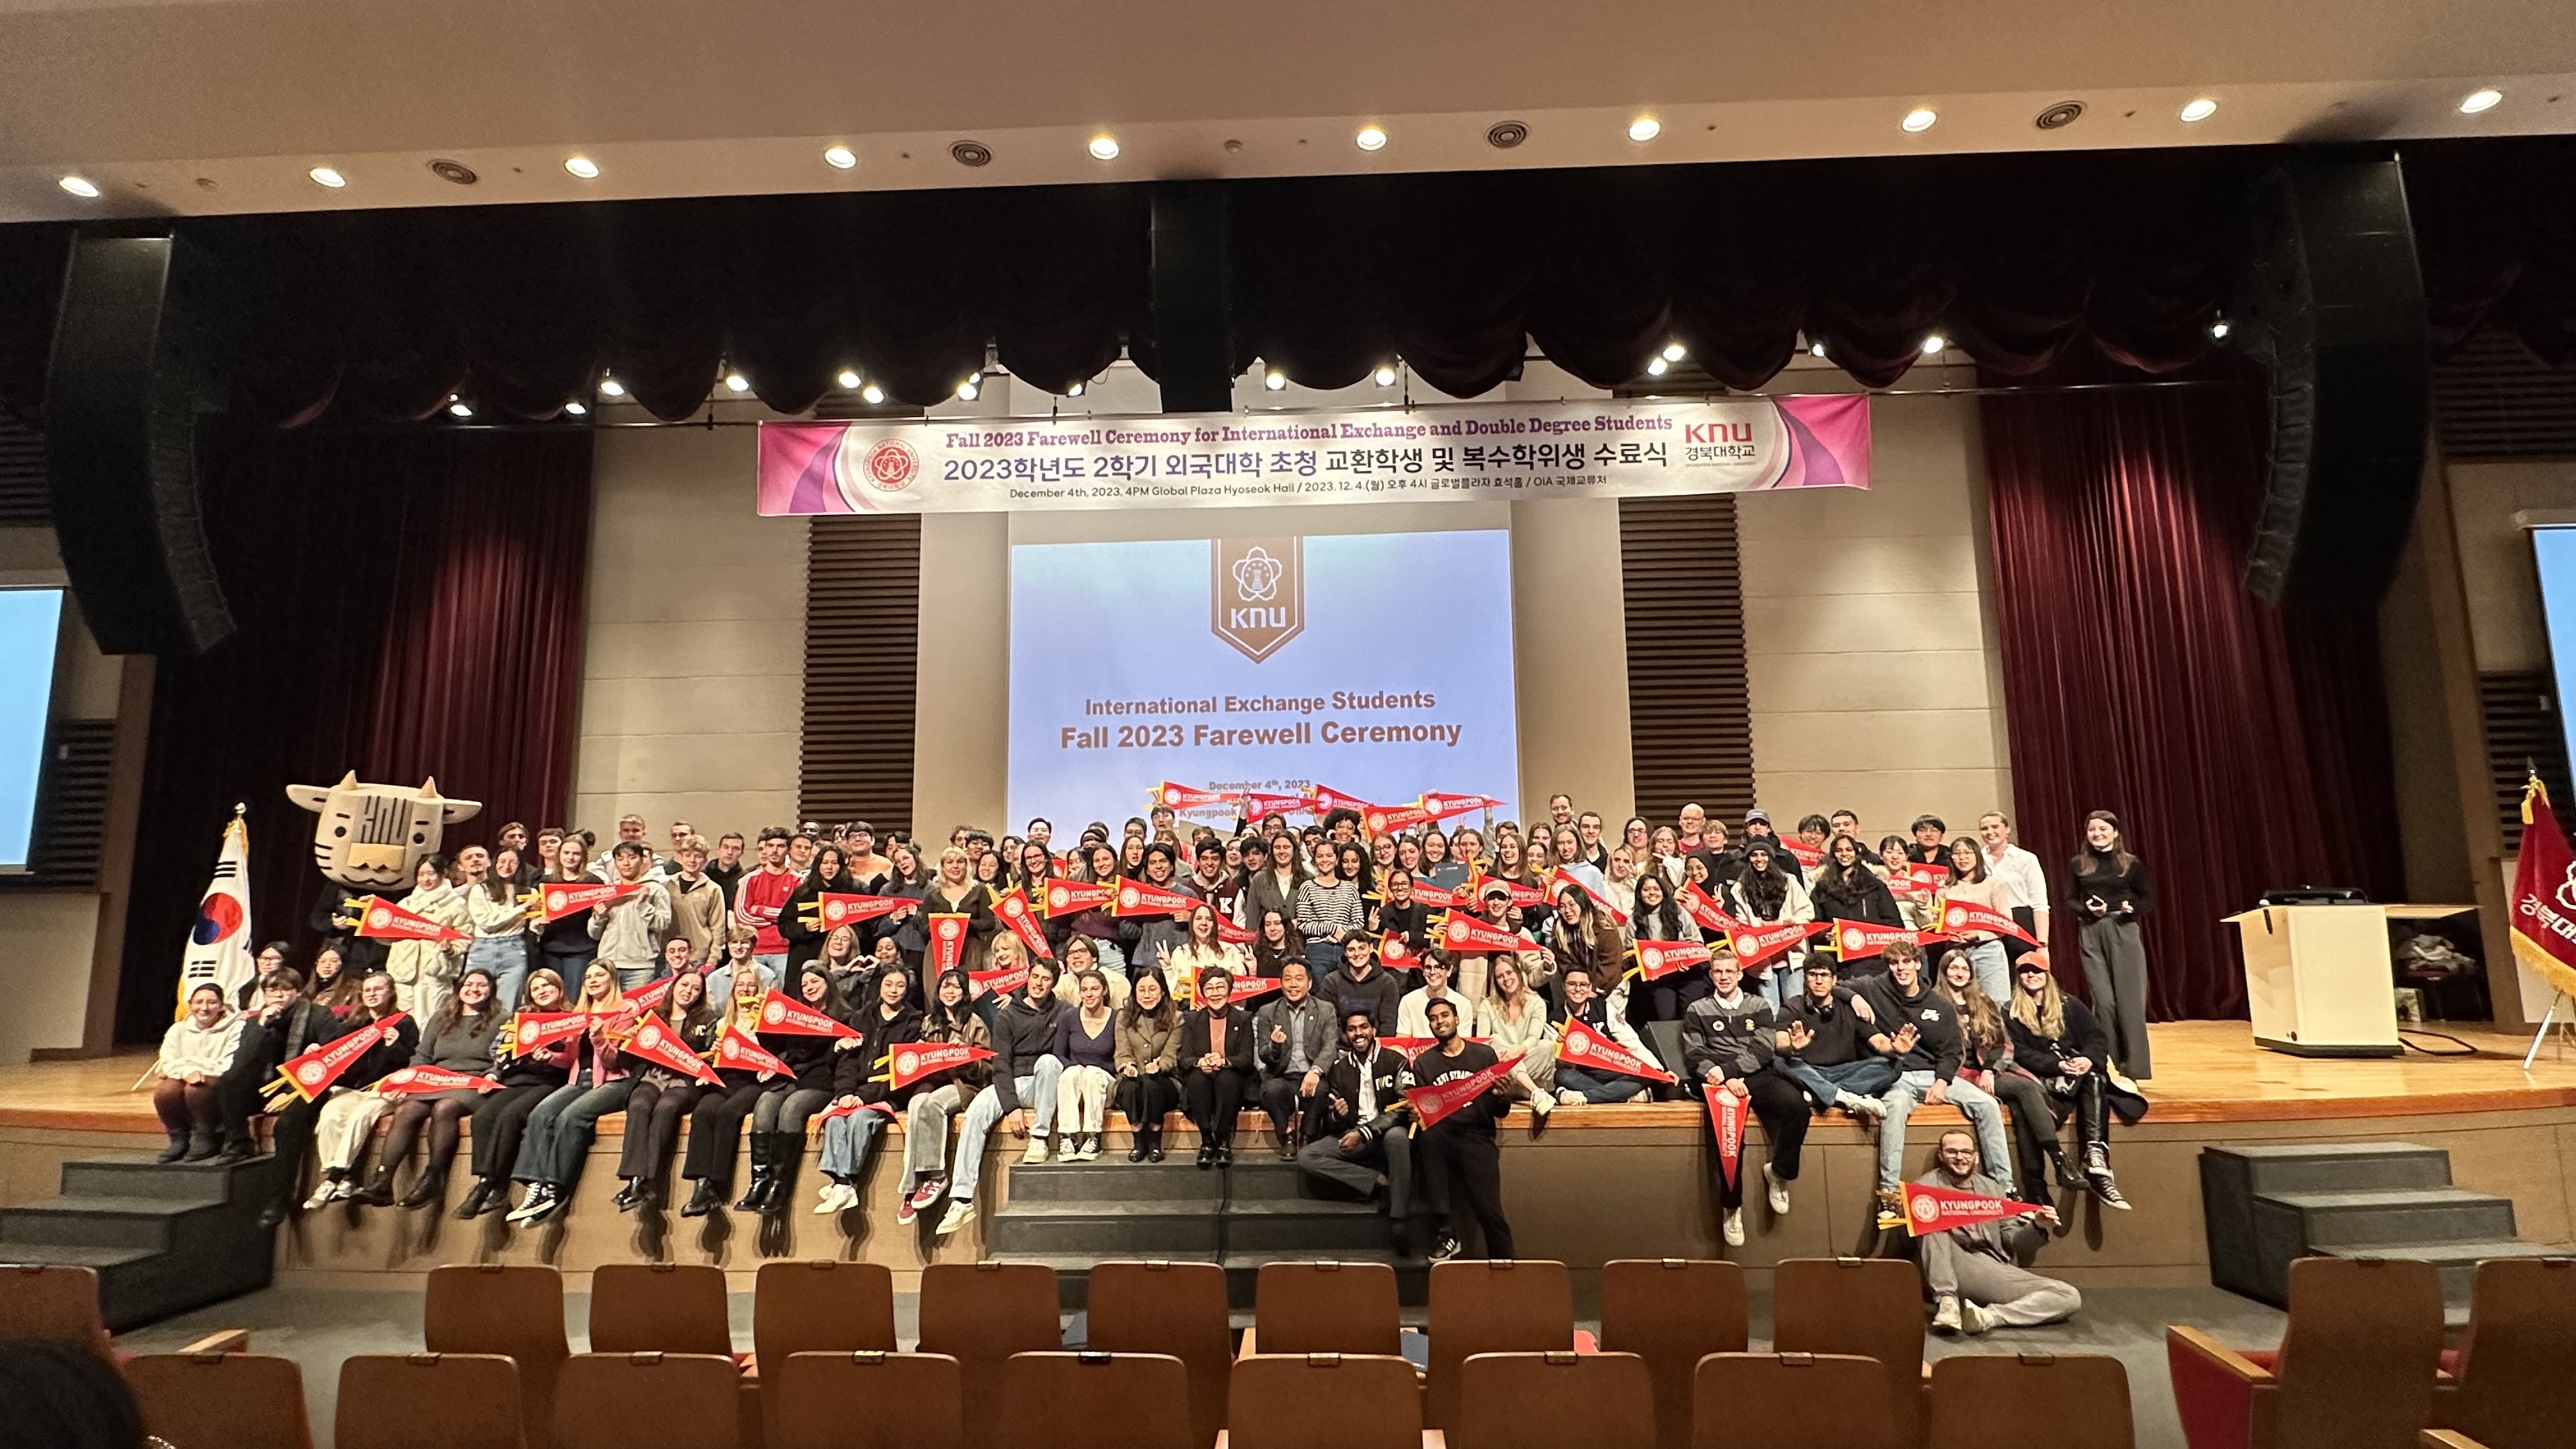 2023 Fall Semester Farewell Ceremony for Exchange and Double Degree Students 관련 이미지입니다